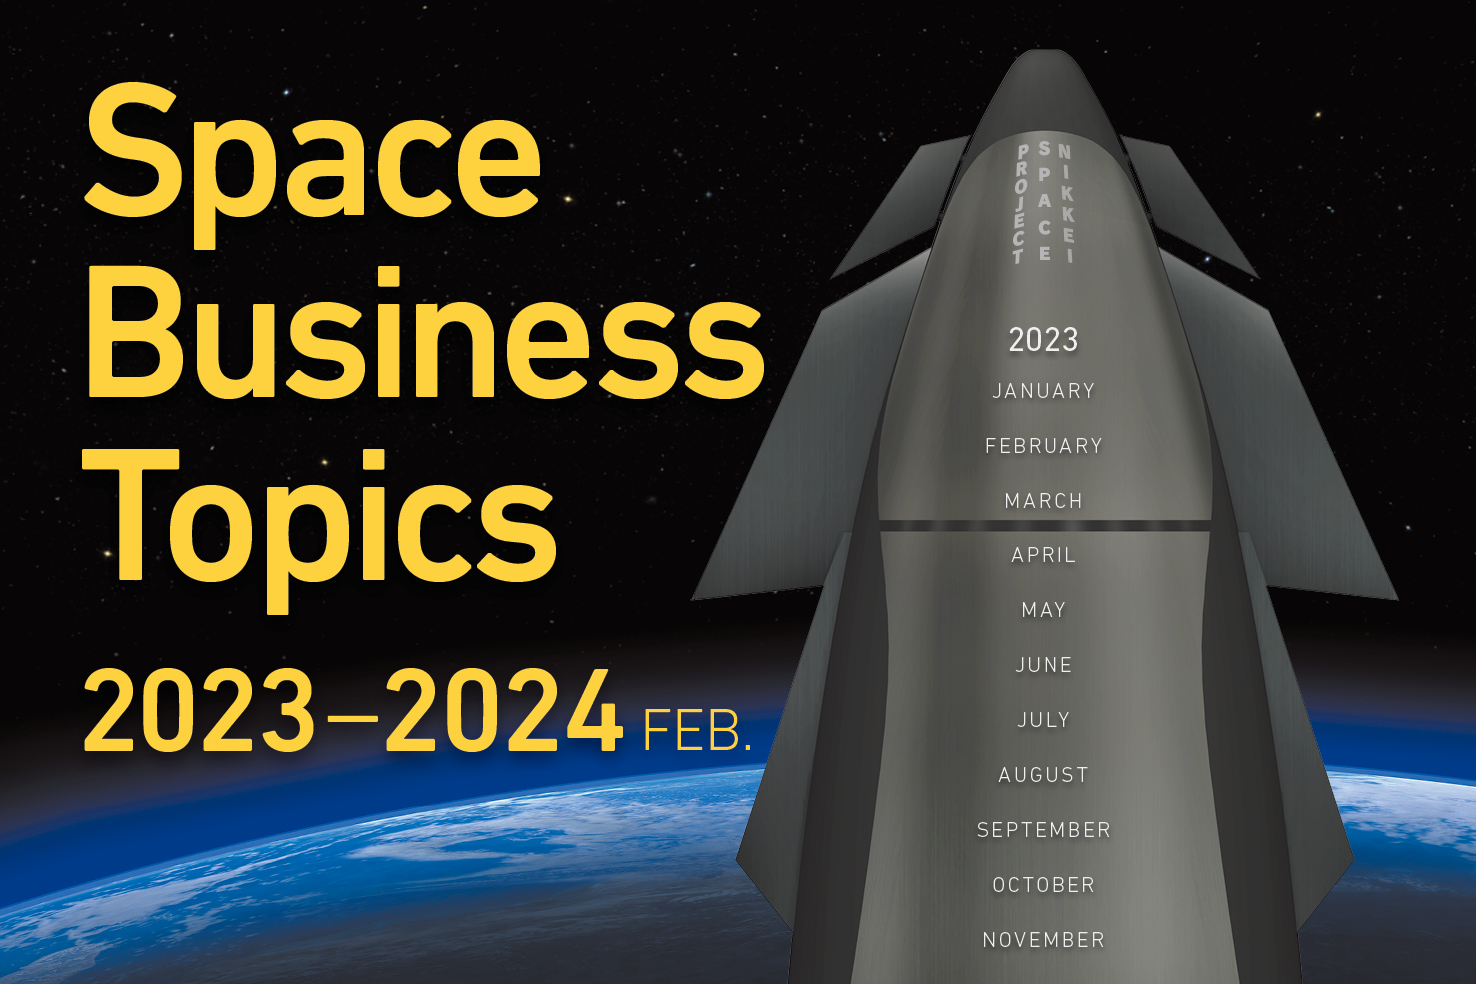 Space Business Topics 2023-2024 FEB.